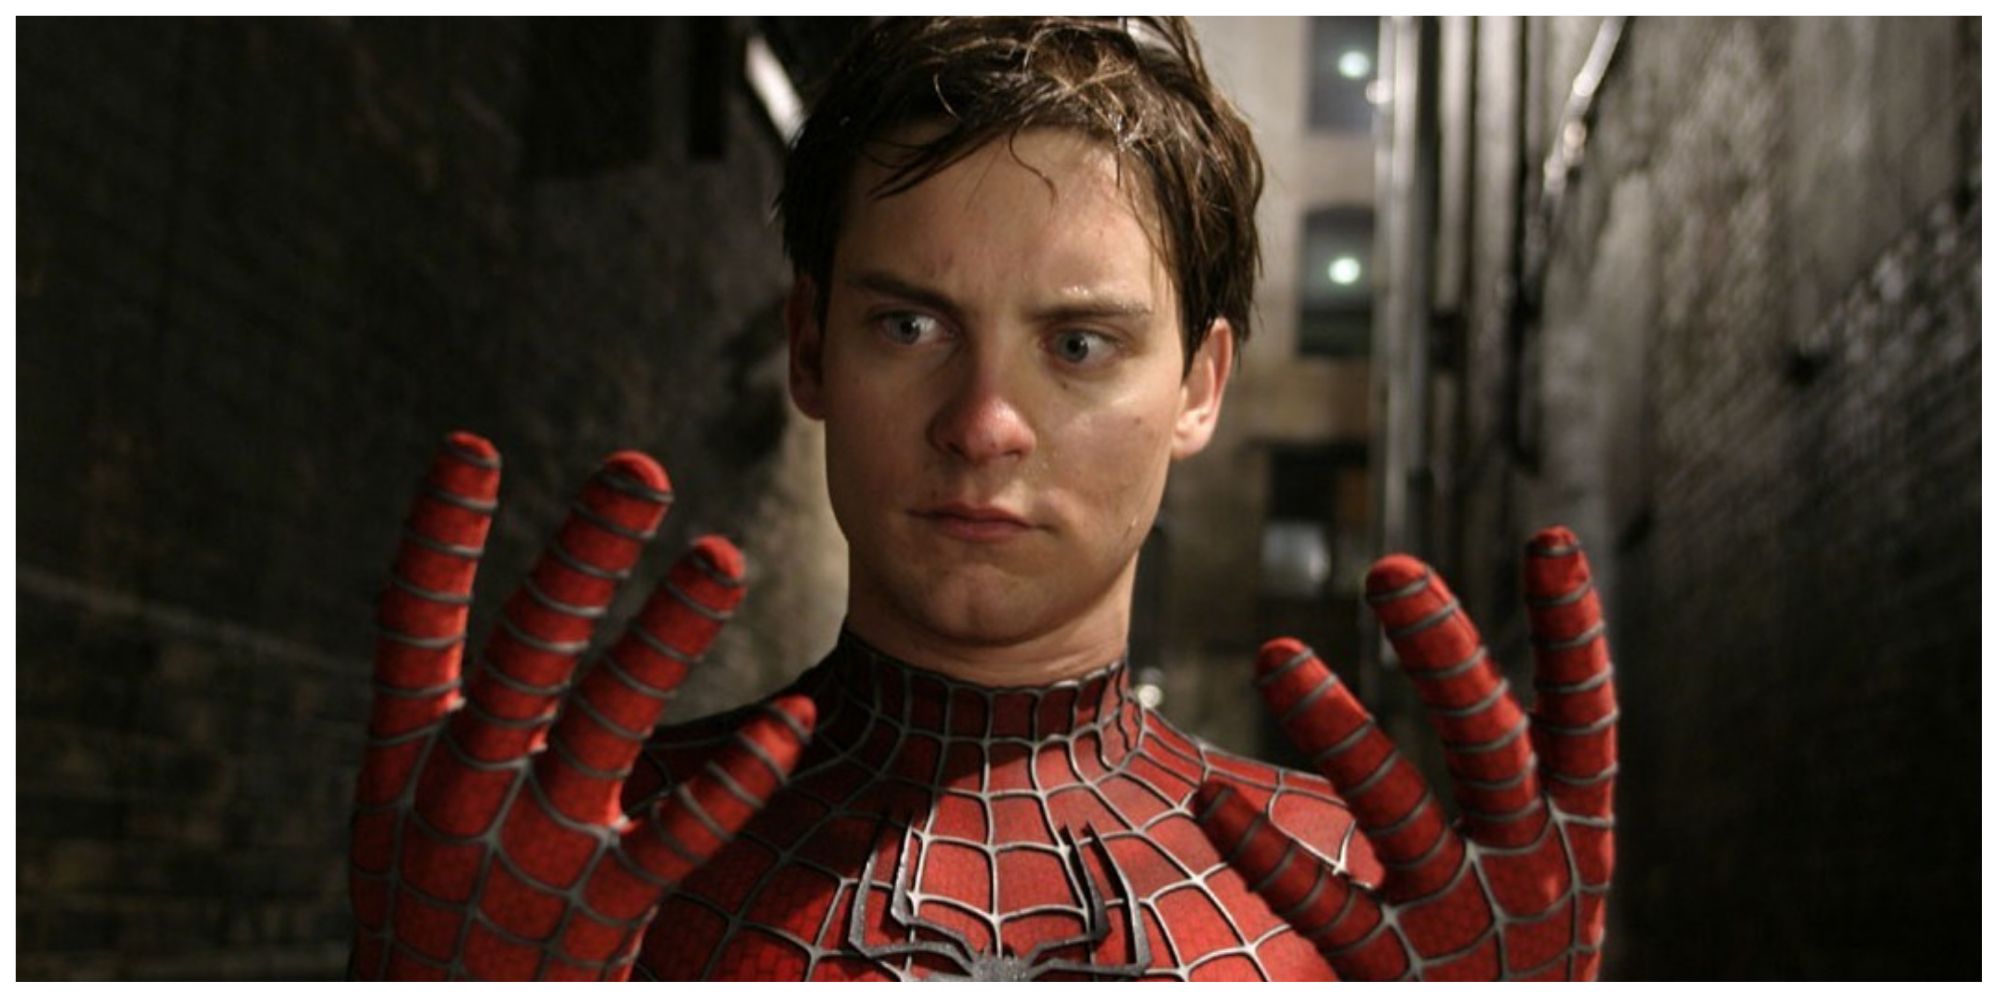 Peter Parker loses his powers in Spider-Man 2